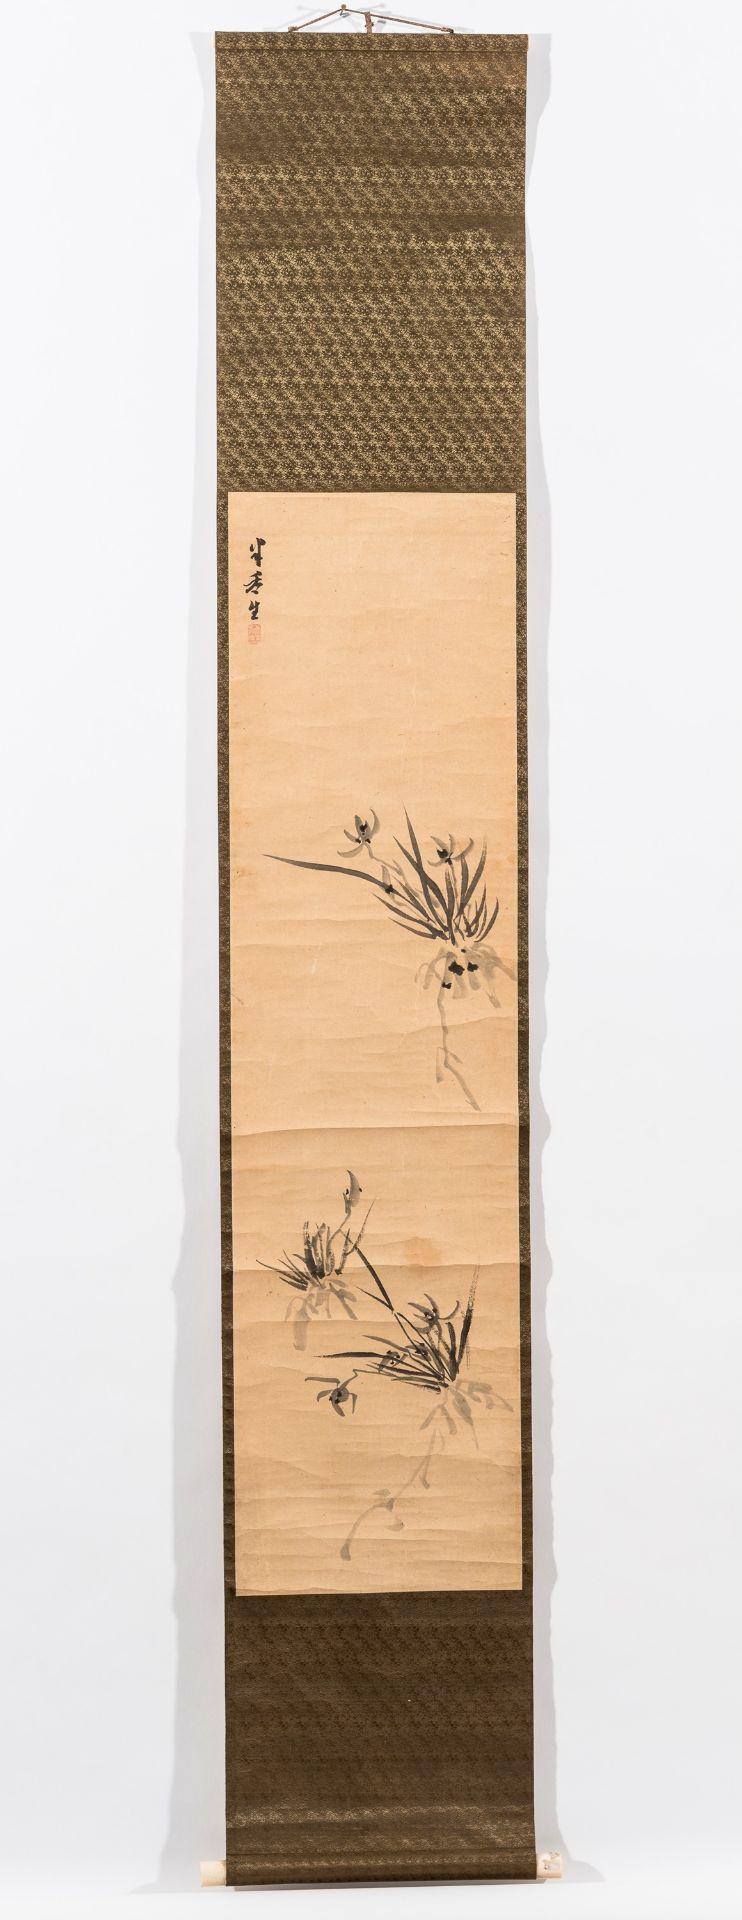 A 'BAMBOO' SCROLL PAINTING - Image 2 of 2